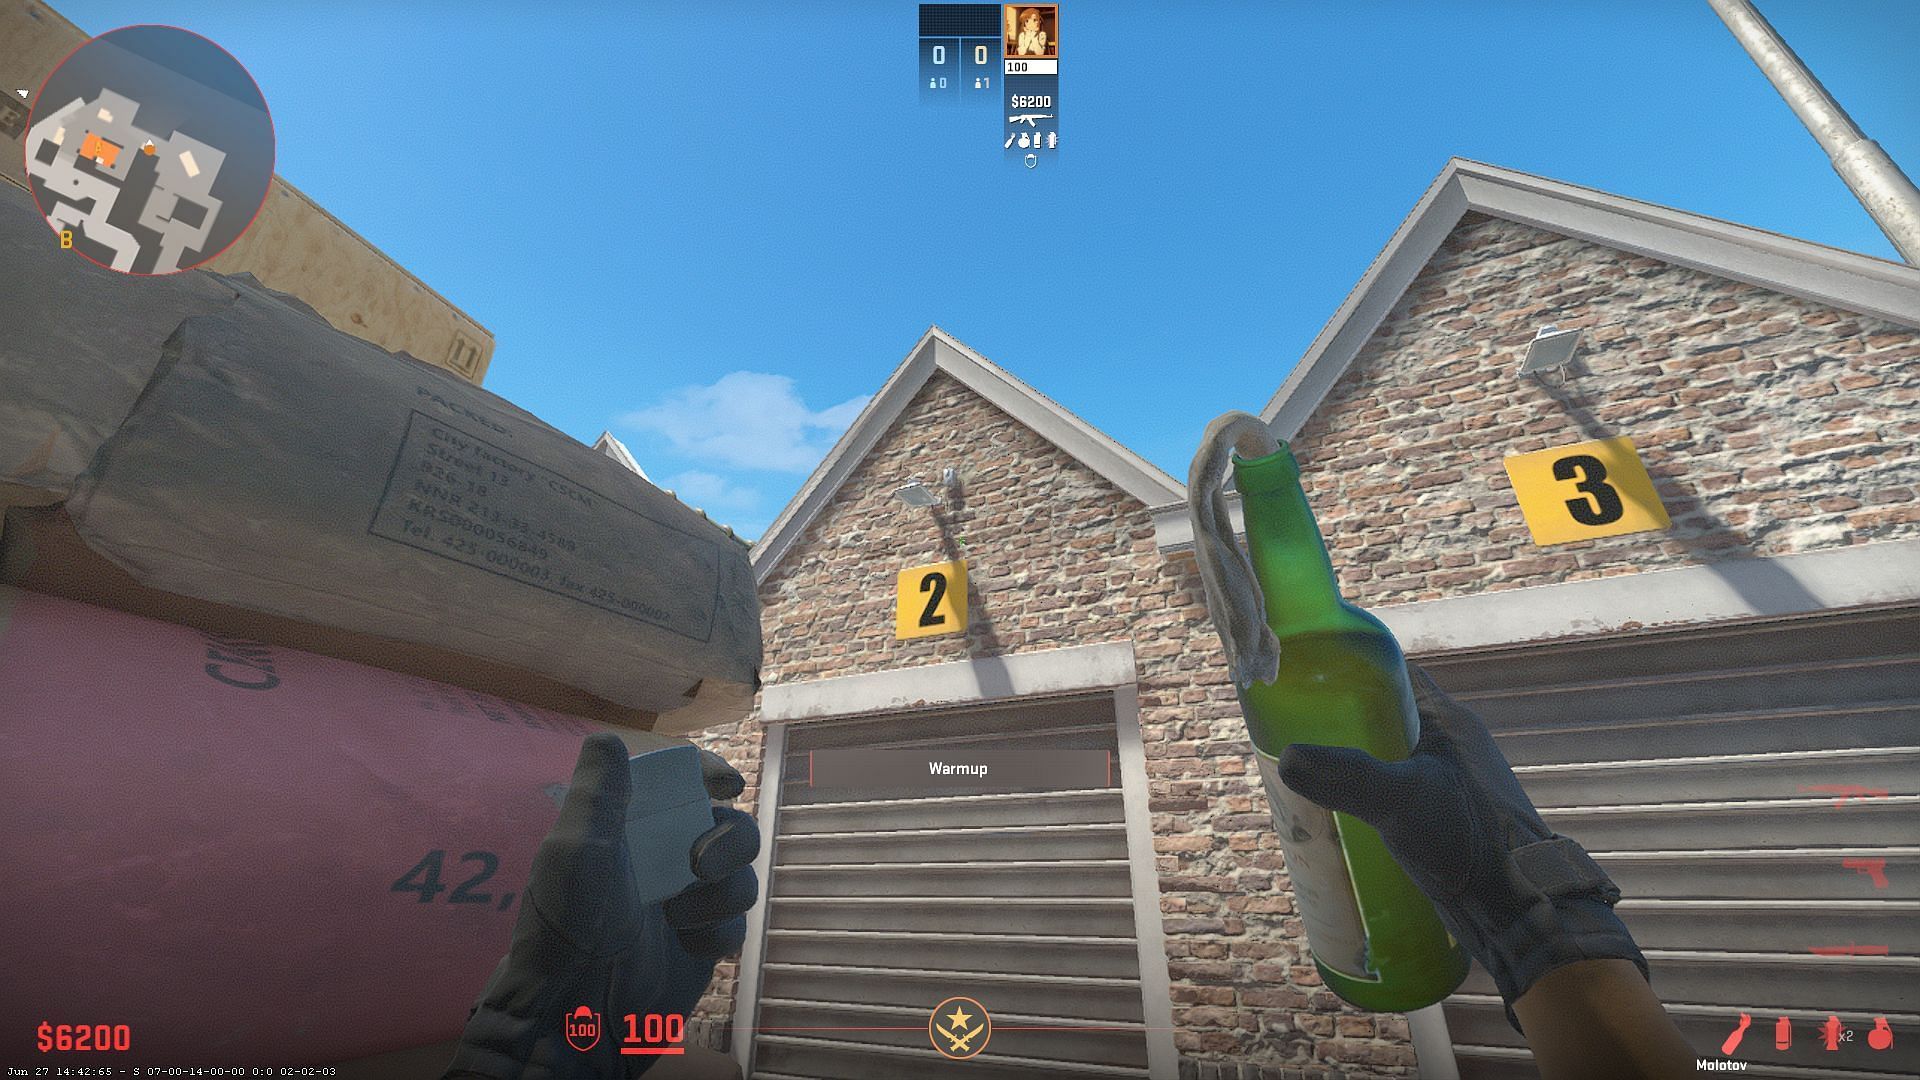 Aim where the crosshair is or on top of the number two sign (Image via Valve)